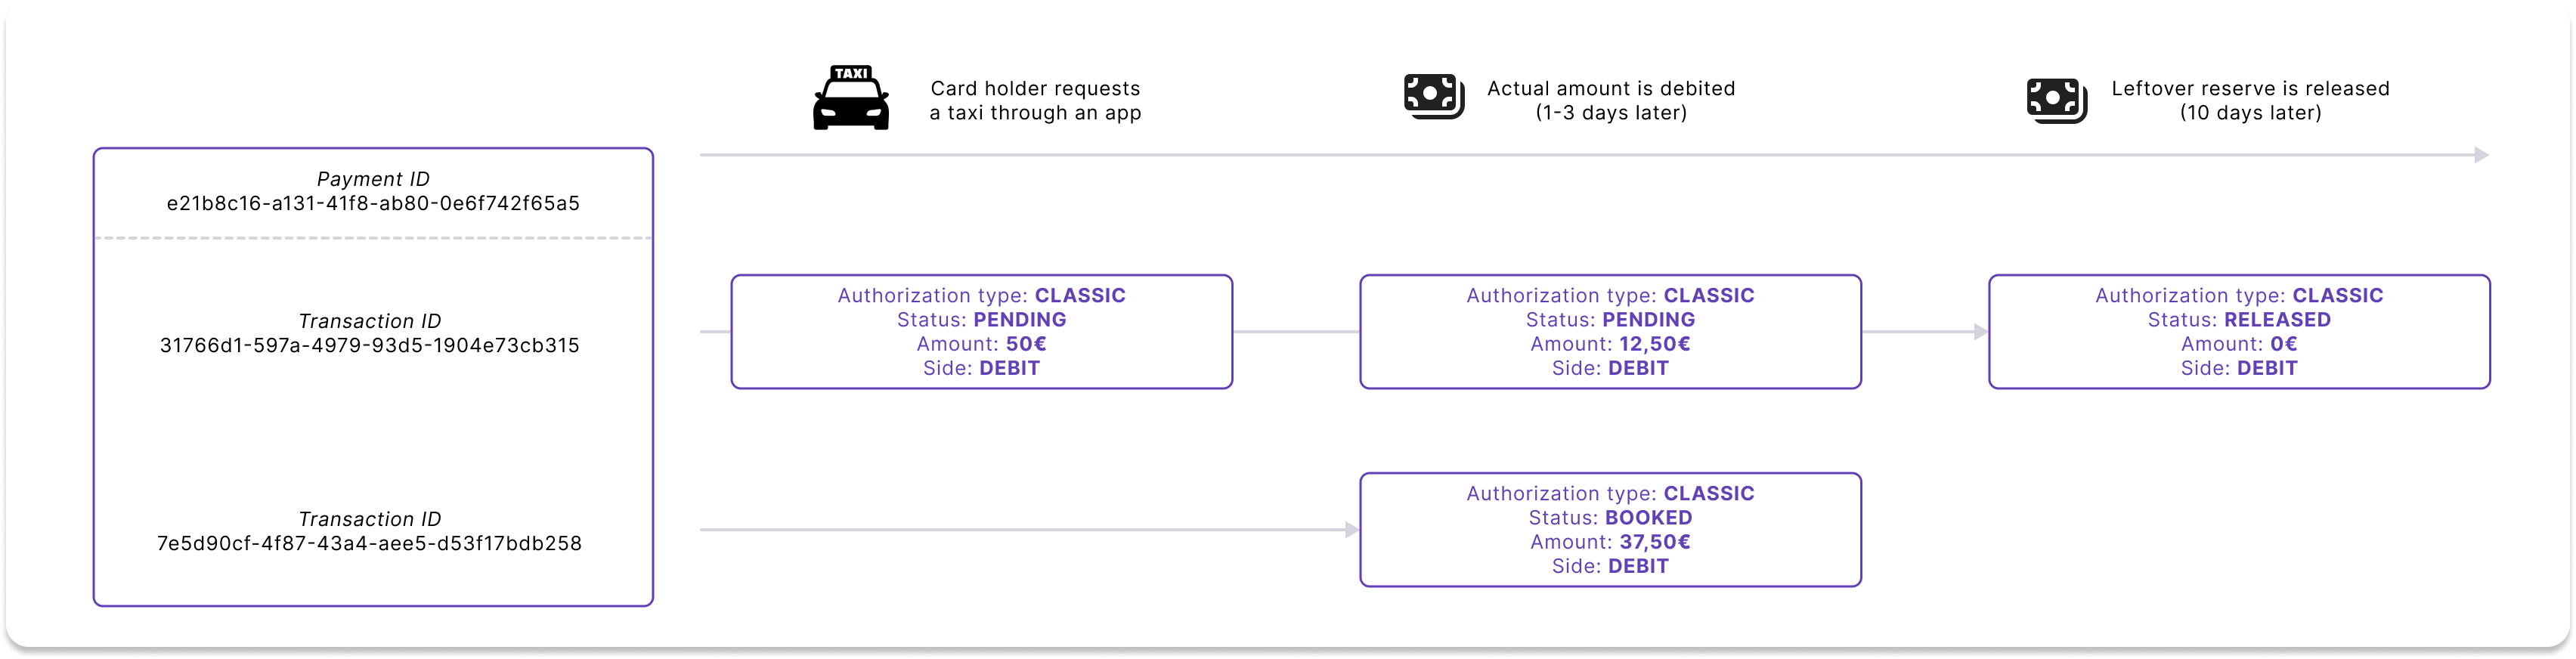 Authorization and partial debit example using taxi app